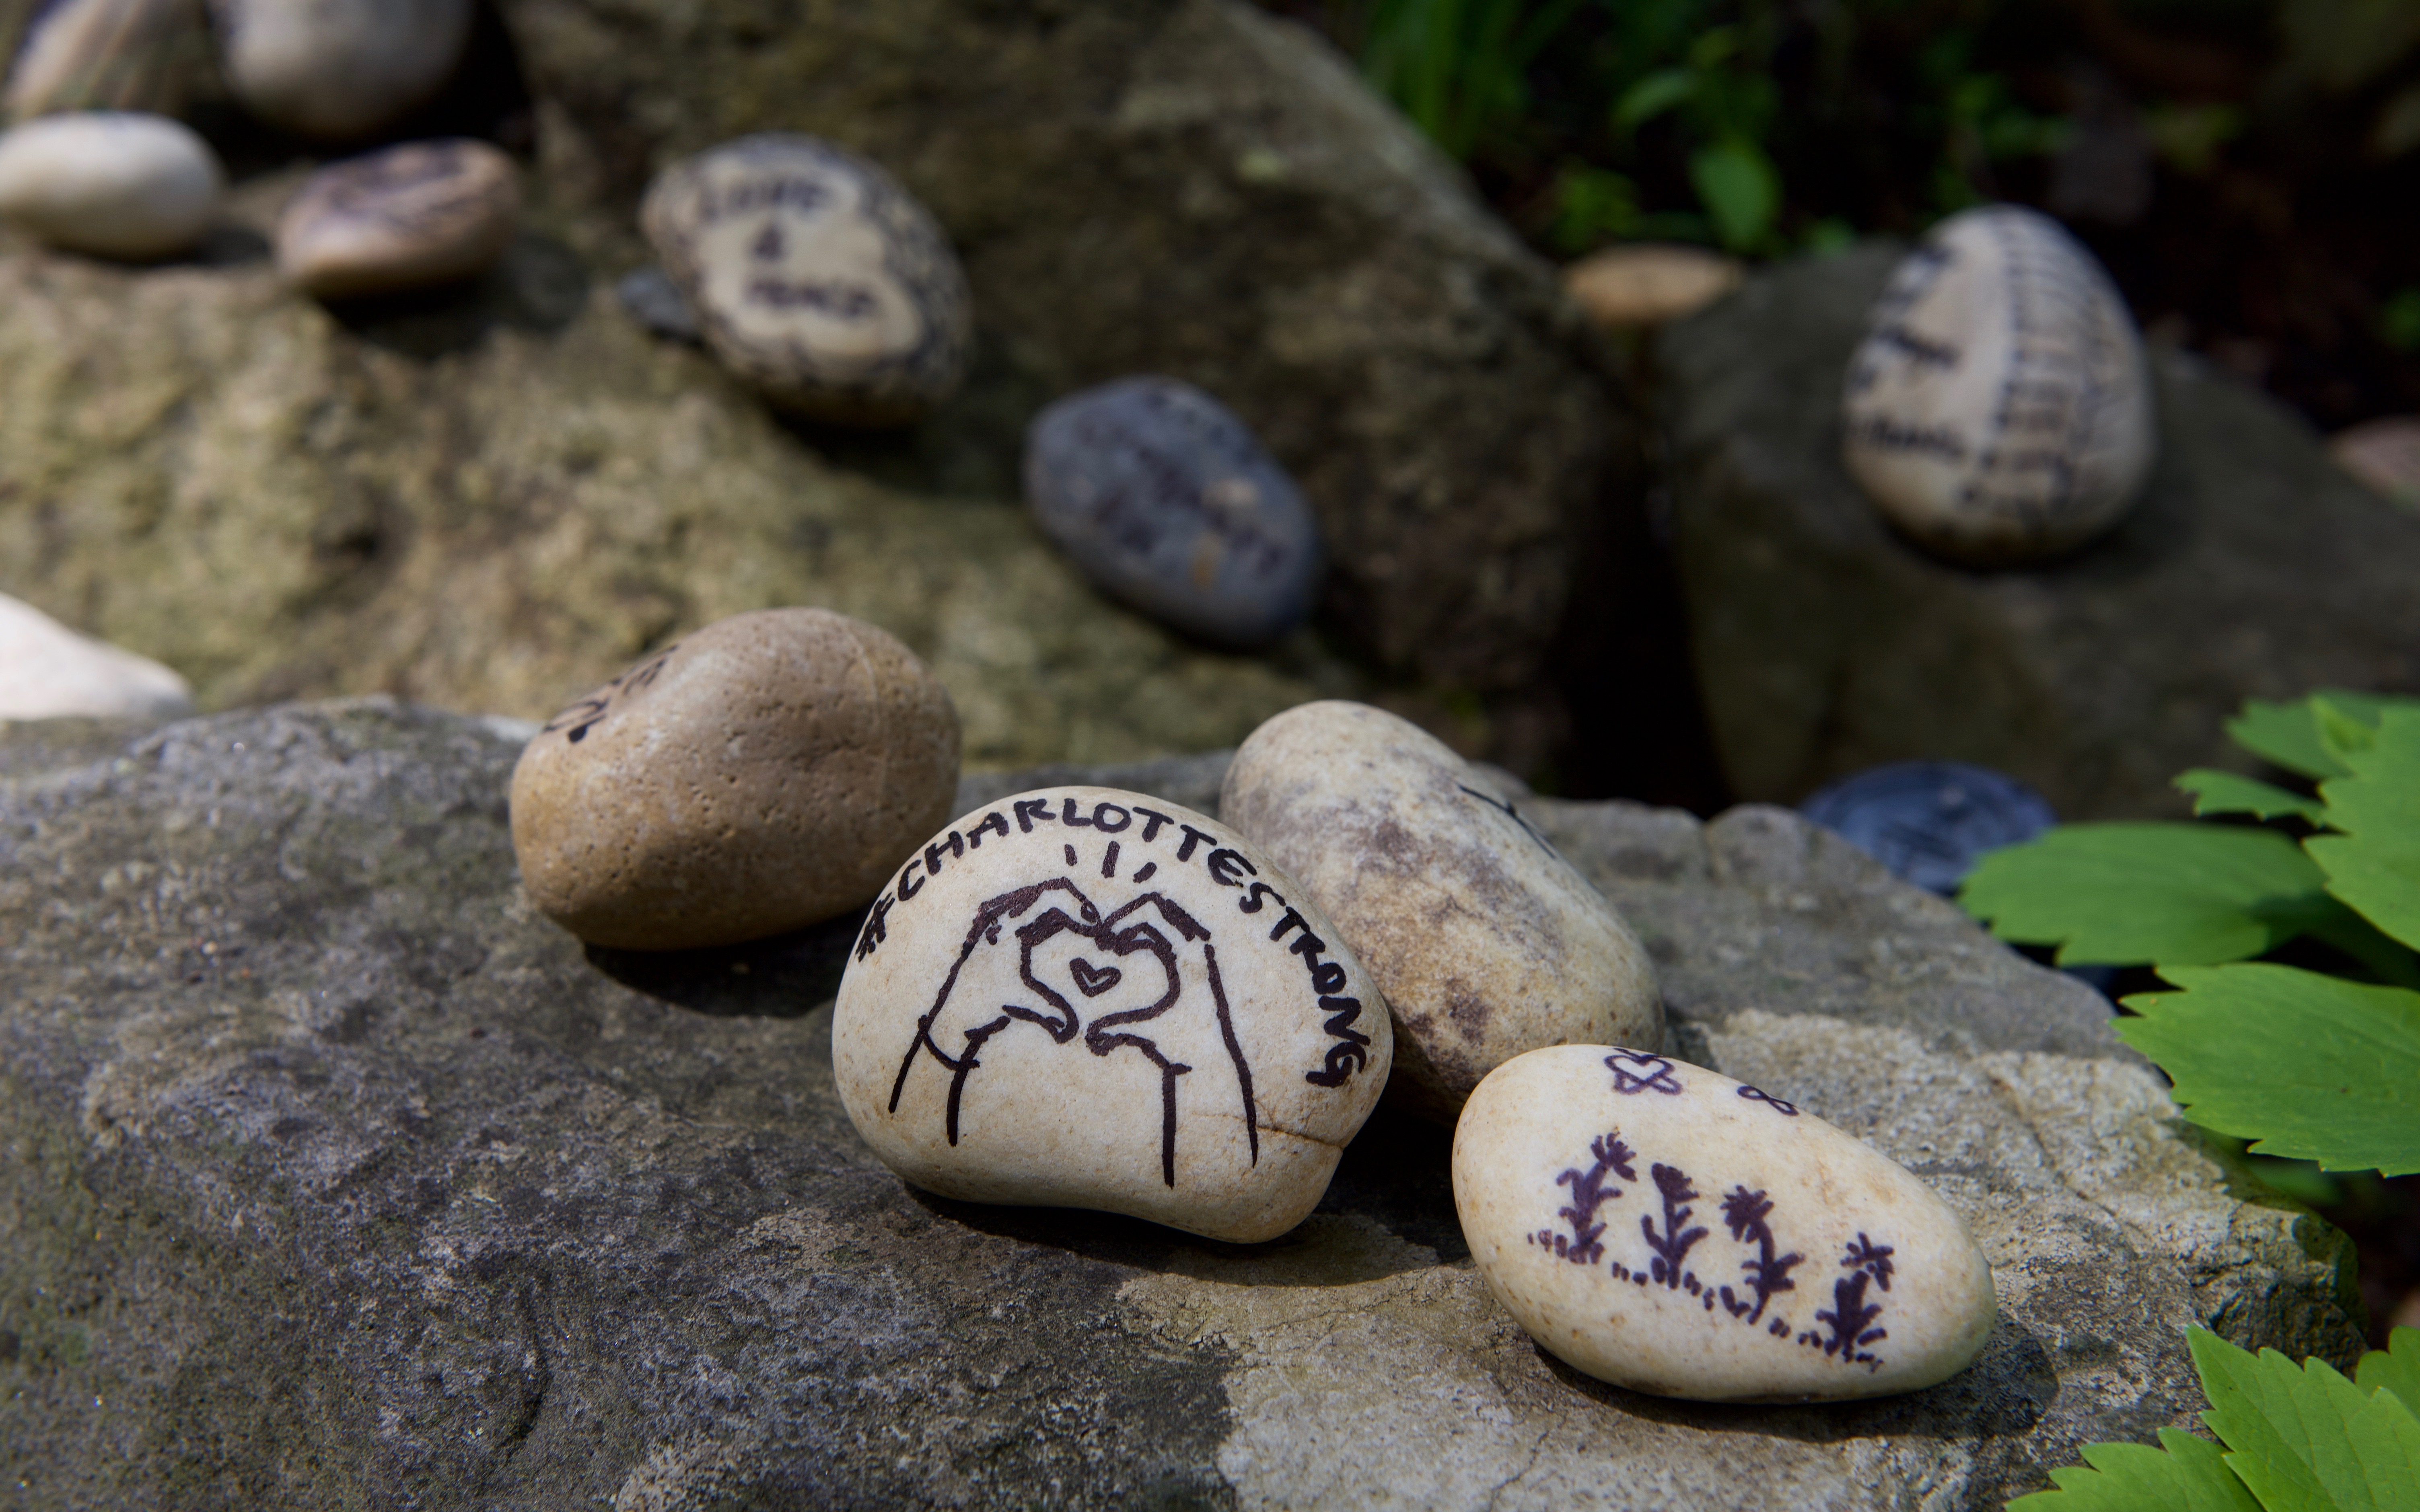 Several stones on larger rocks. One stone has the words Charlotte Strong and hands with a heart drawn on it.